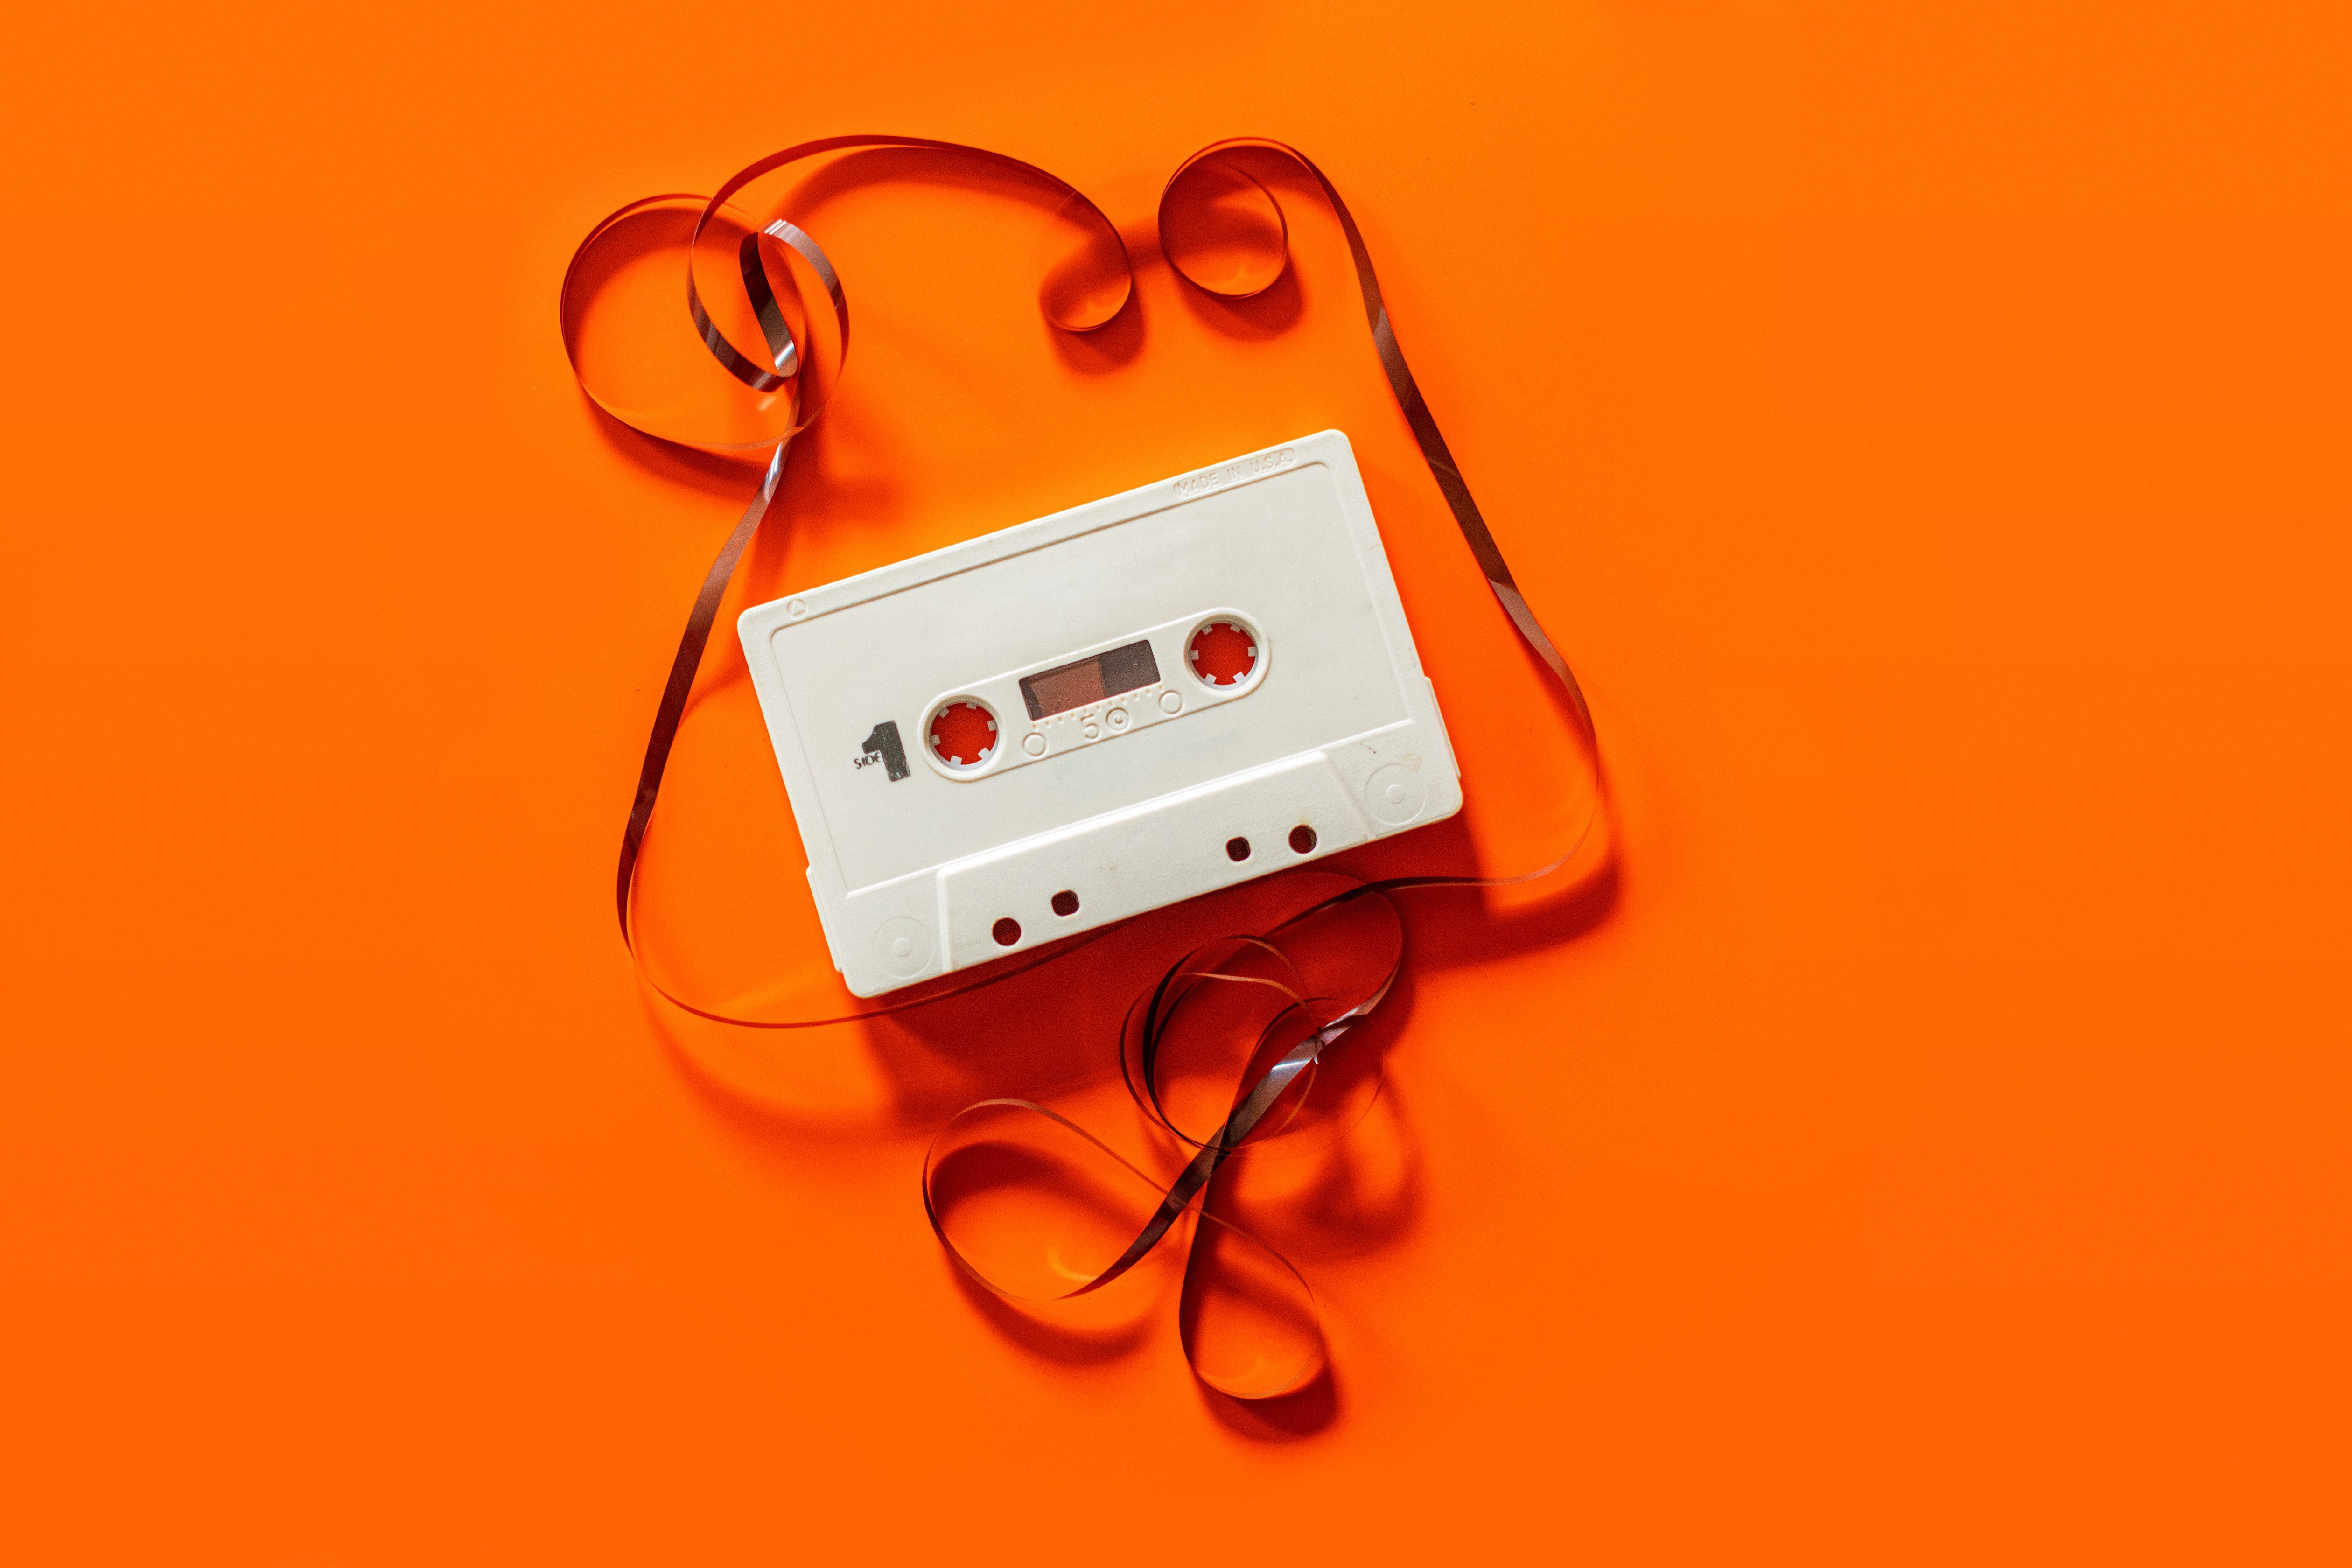 Cassette tape on orange background, symbolizing 1980s, the start of IT support services - Inderly IT